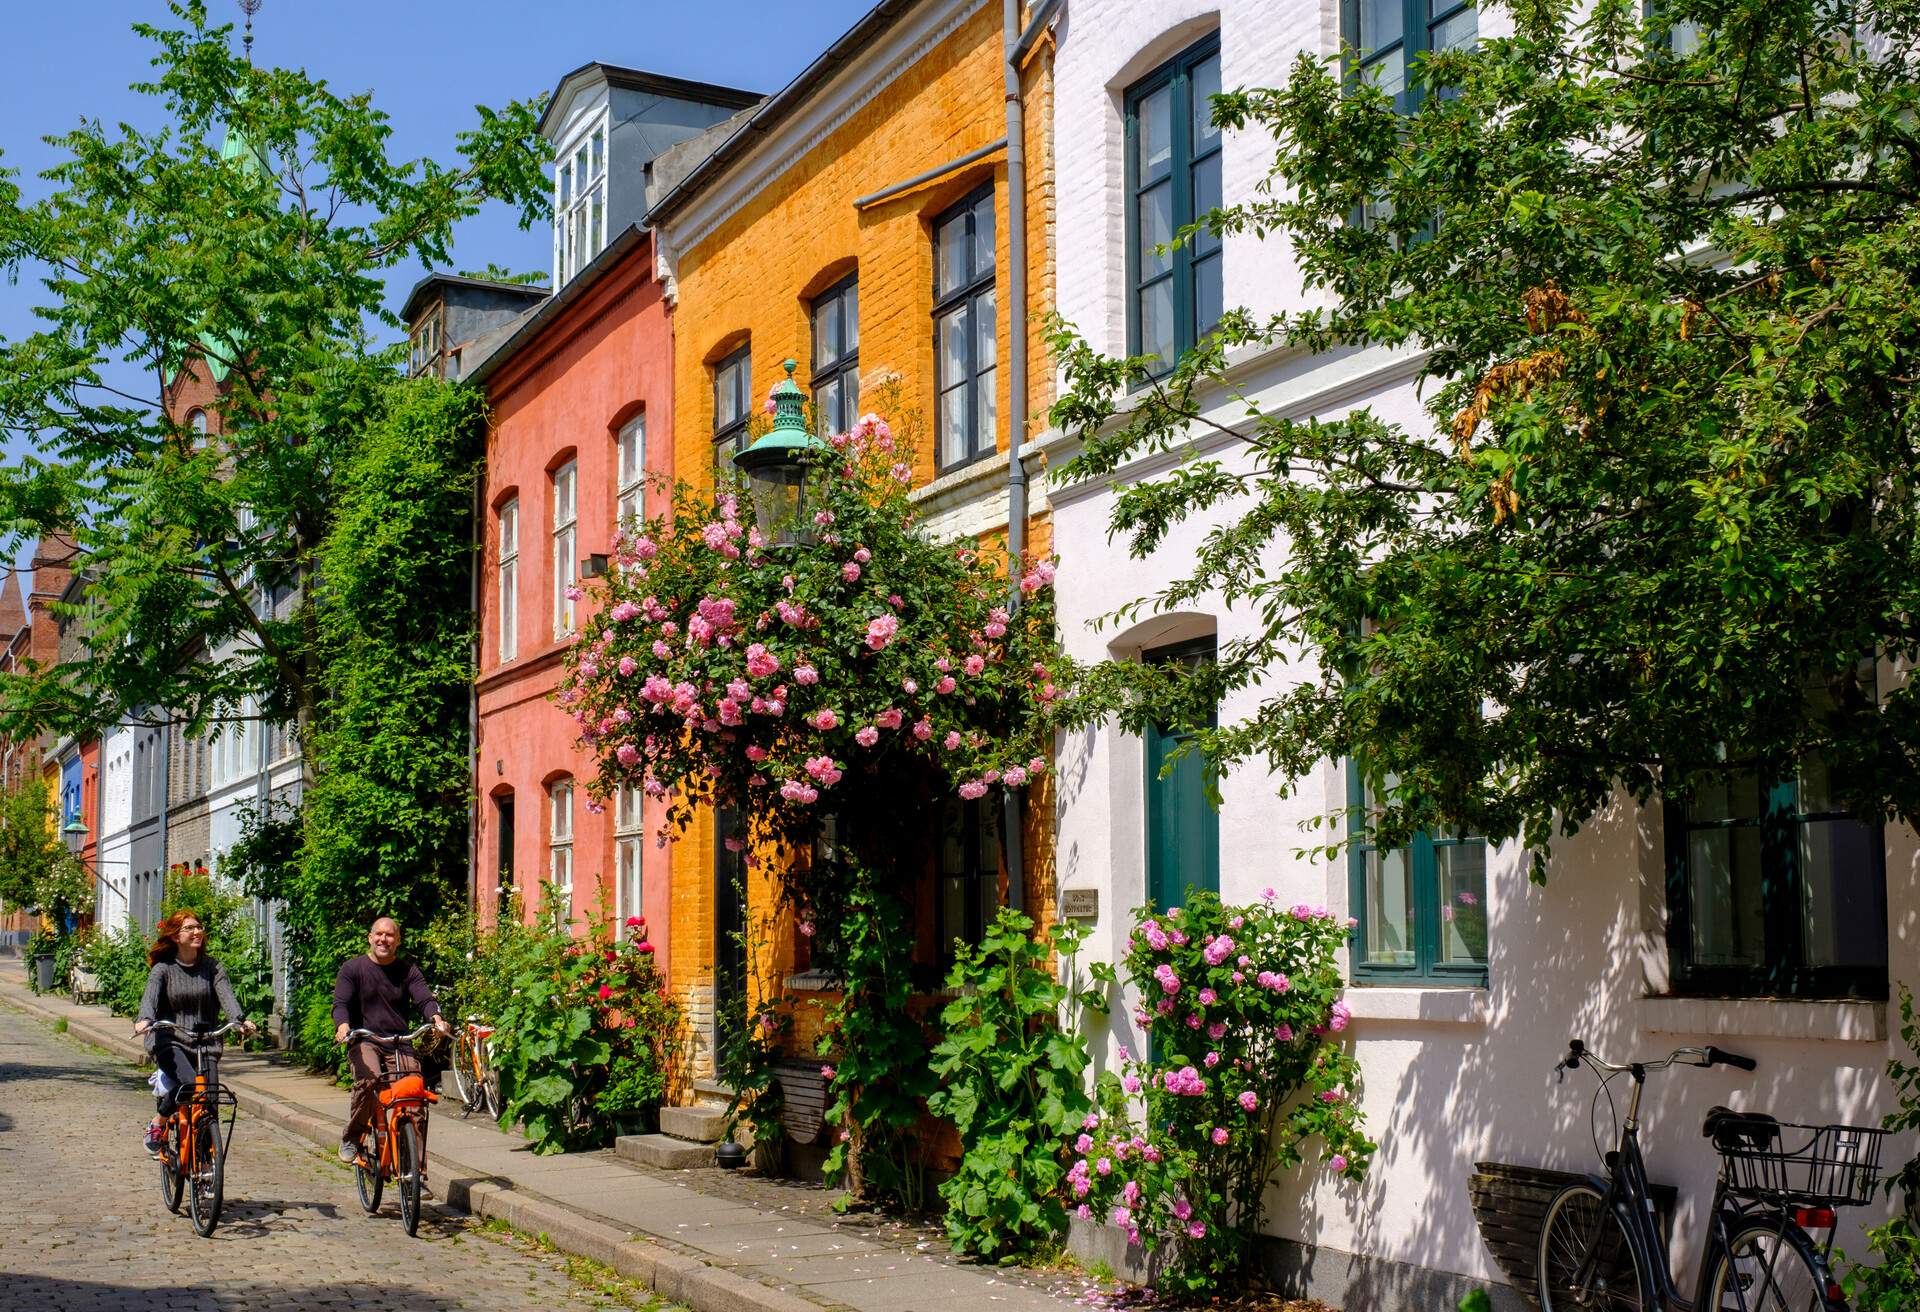 Two people ride bicycles on a street along colourful adjacent buildings covered in lush foliage.